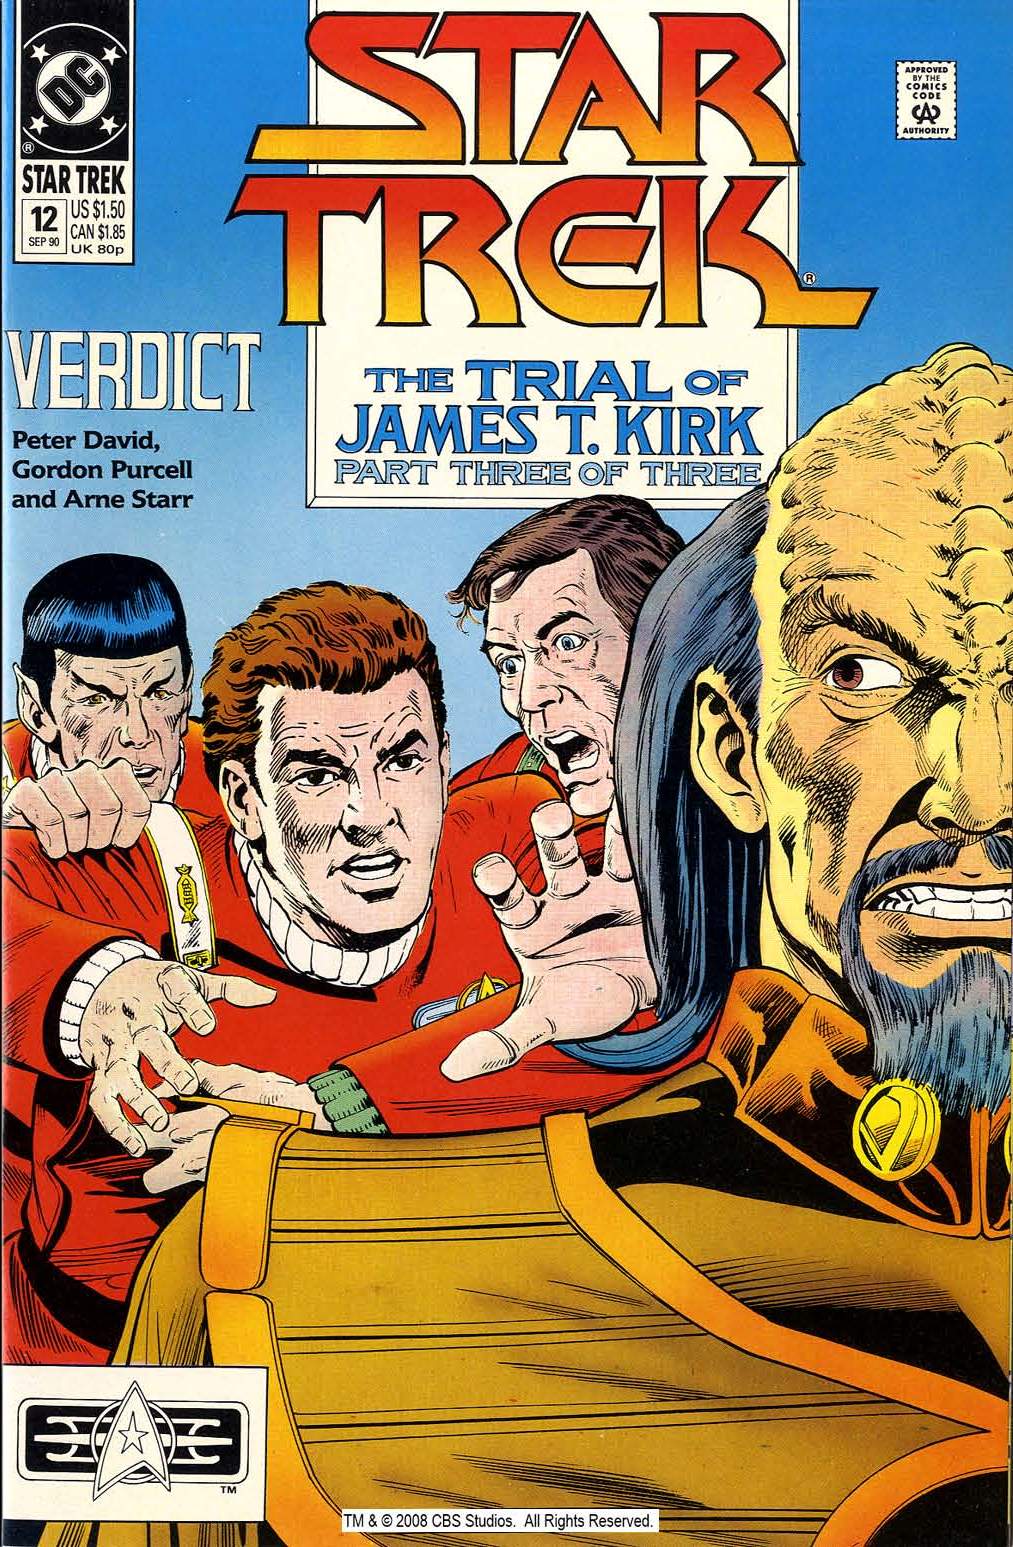 The trial of James T.Kirk.